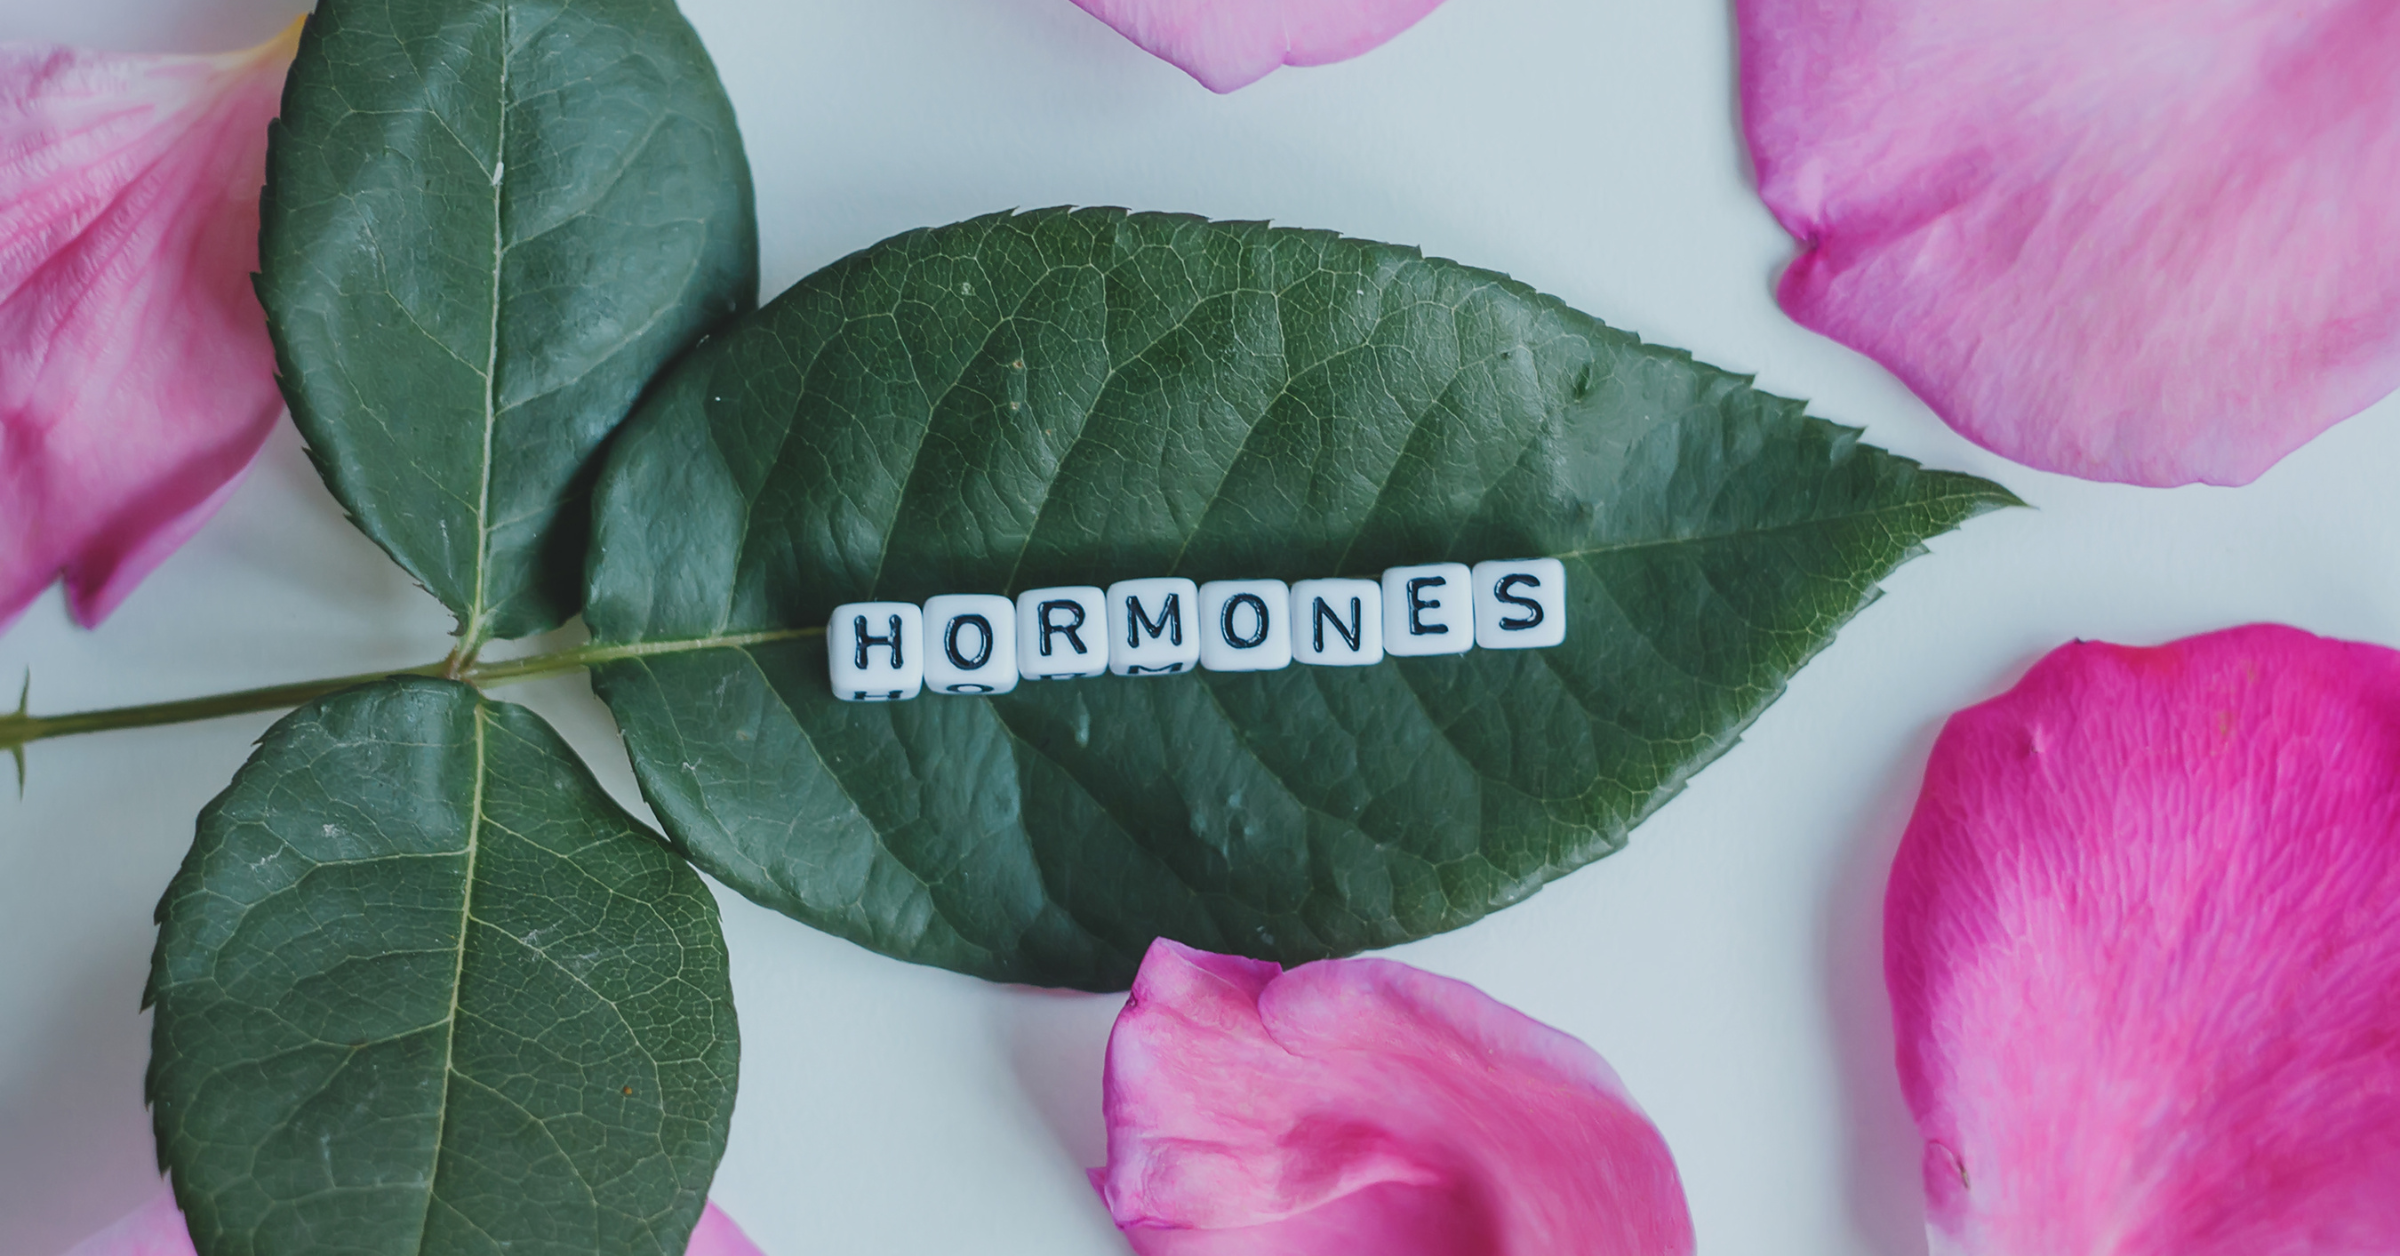 Discover 8 proven ways to reset your hormones naturally, promoting balance and well-being through effective, holistic approaches and lifestyle adjustments.